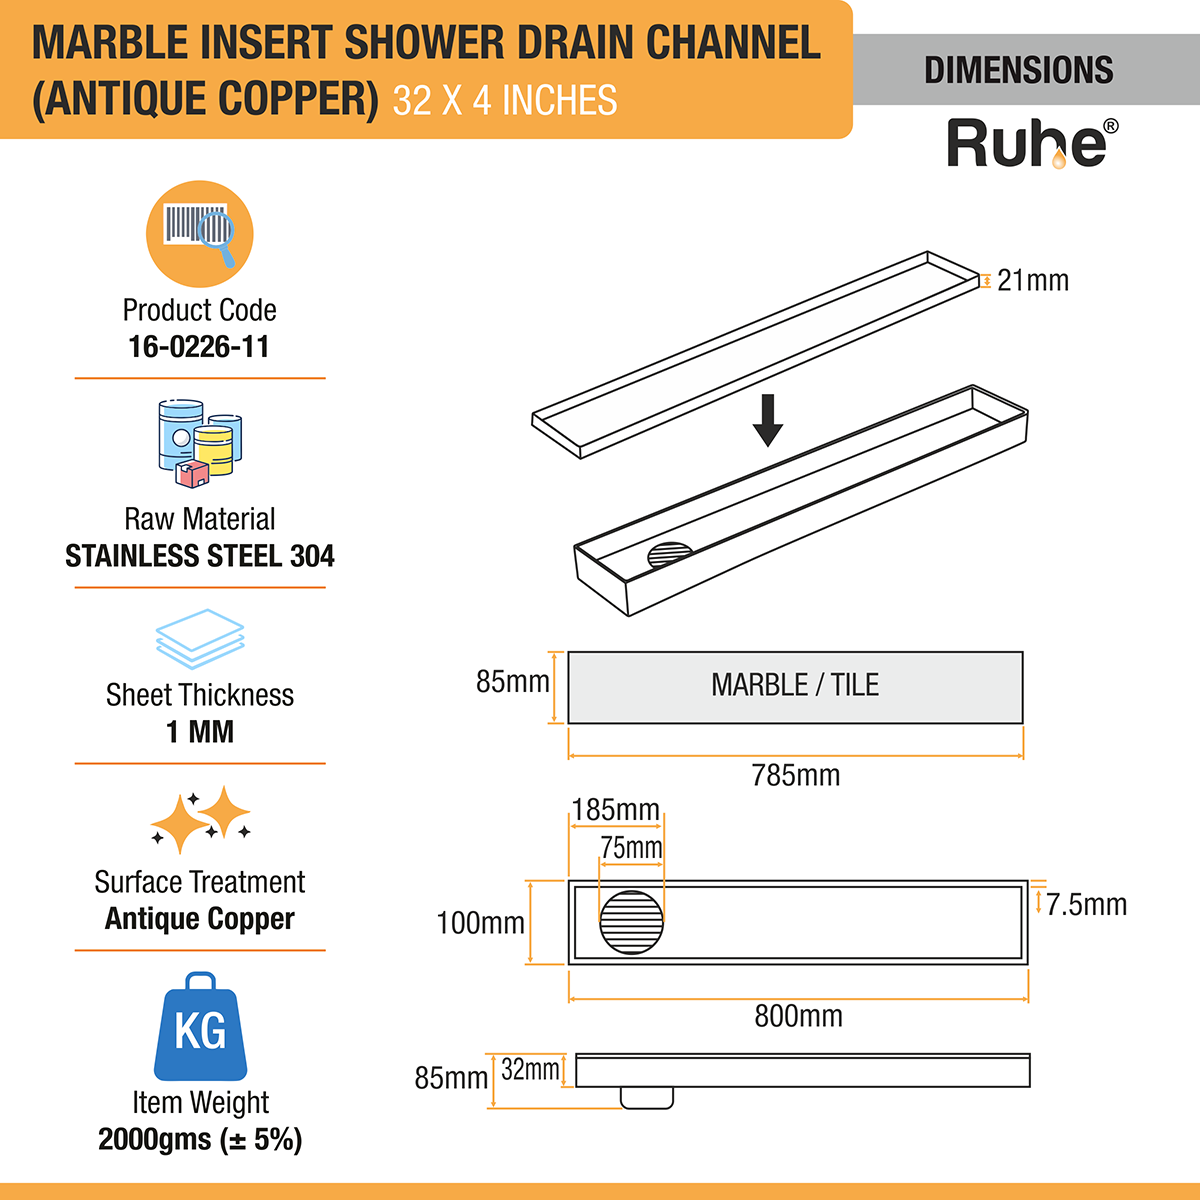 Marble Insert Shower Drain Channel (32 x 4 Inches) ROSE GOLD PVD Coated dimensions and sizes